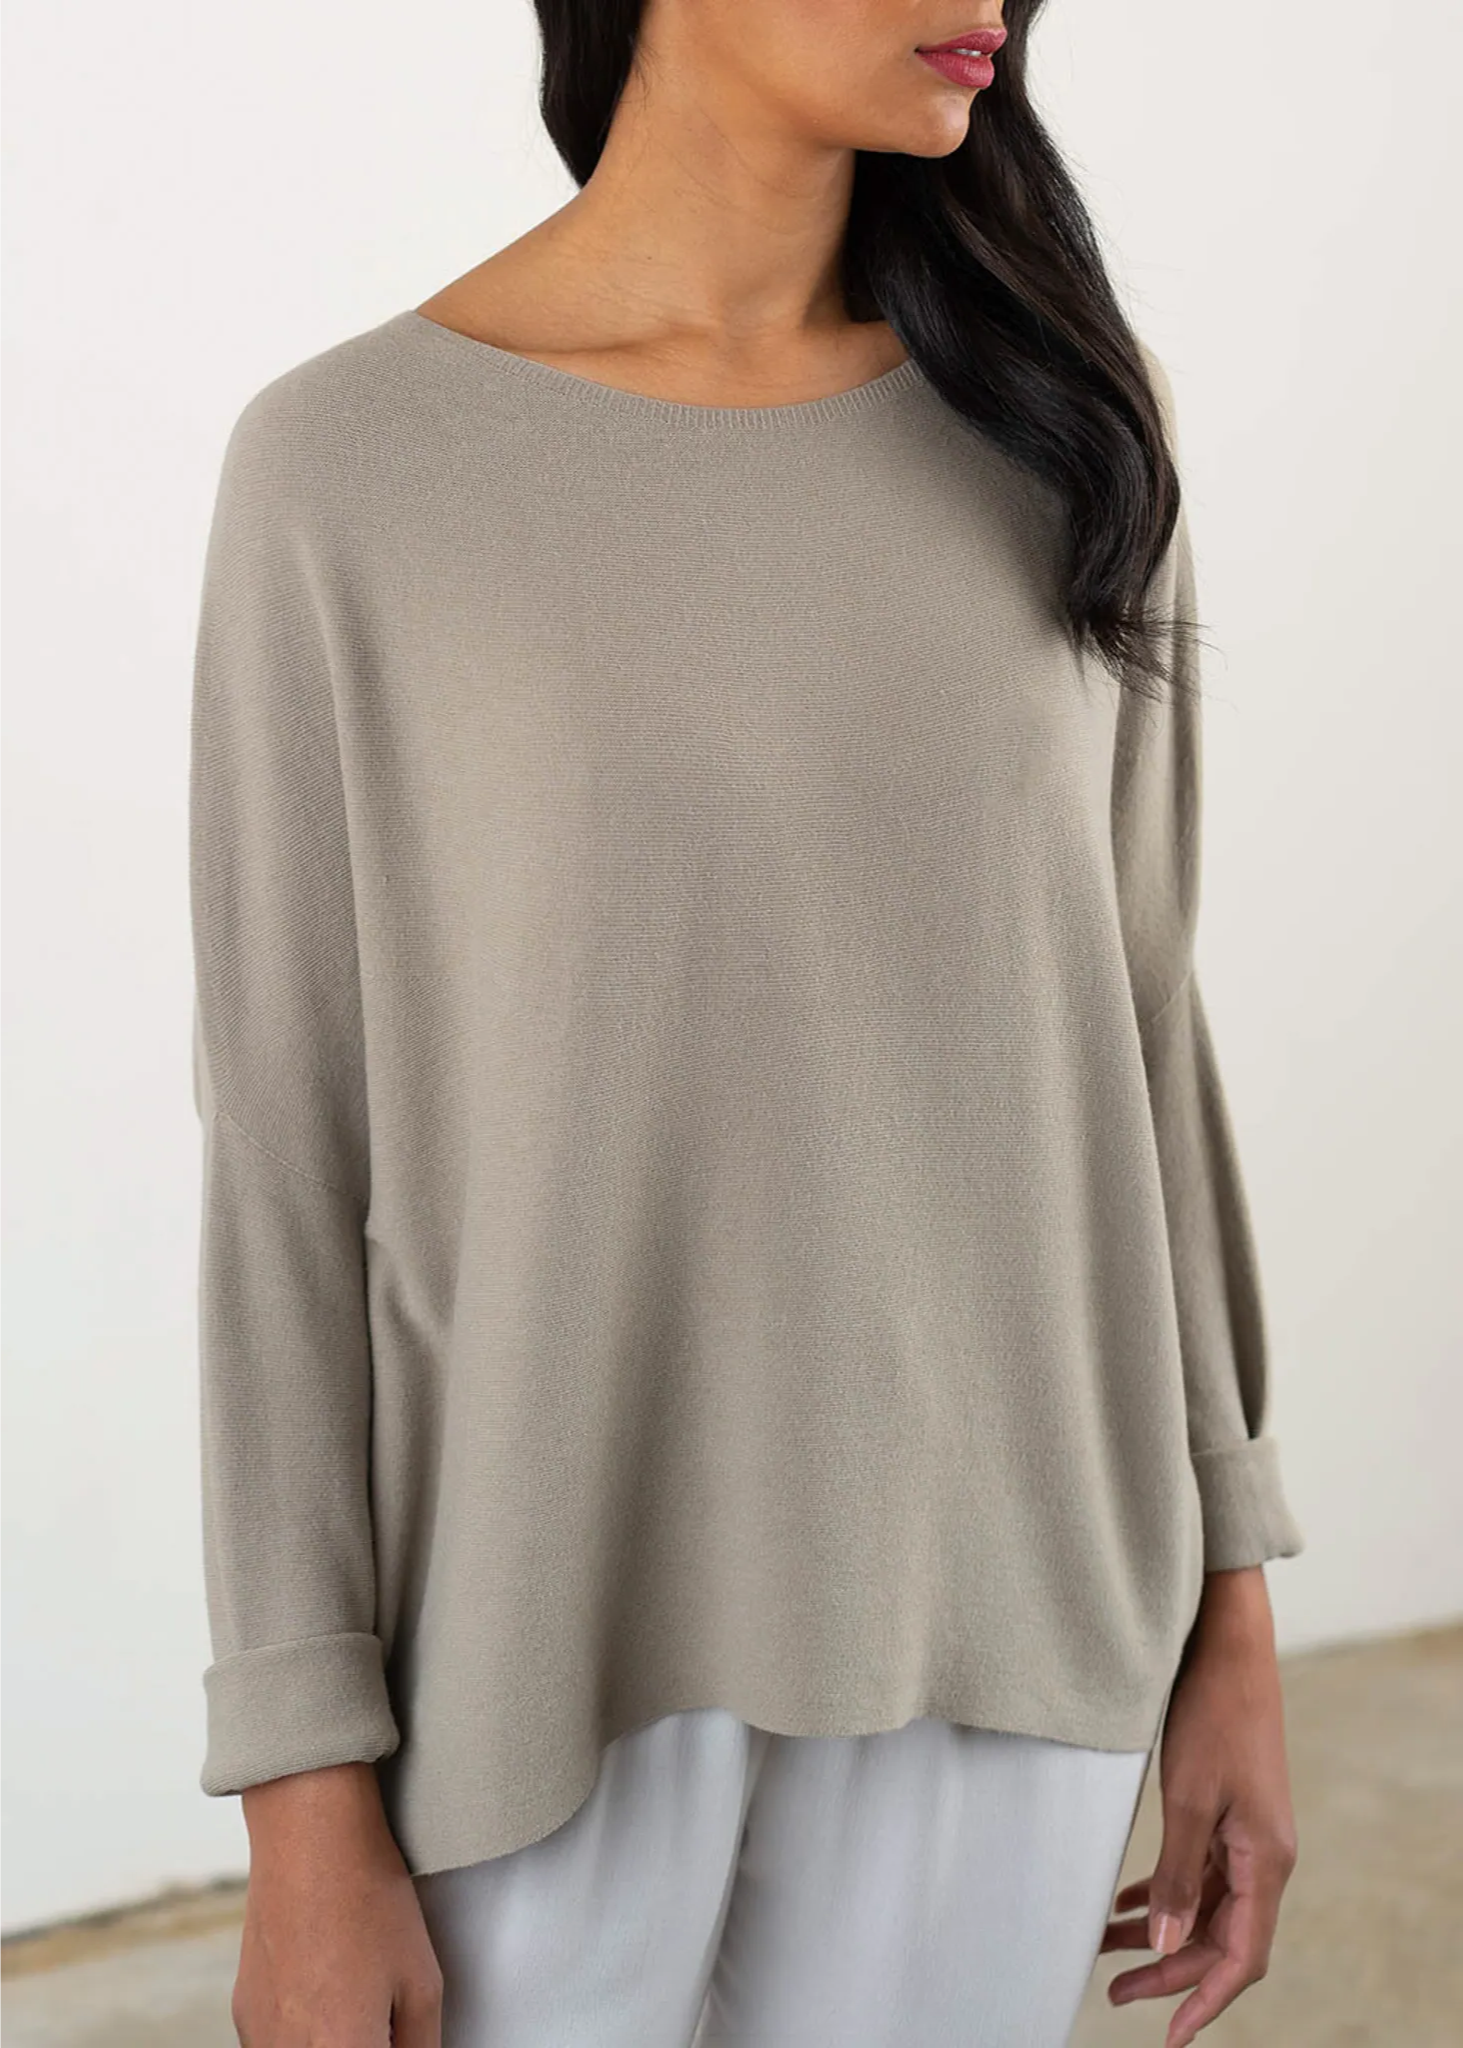 A model wearing a greige loose fitting sweater with a scoop neckline